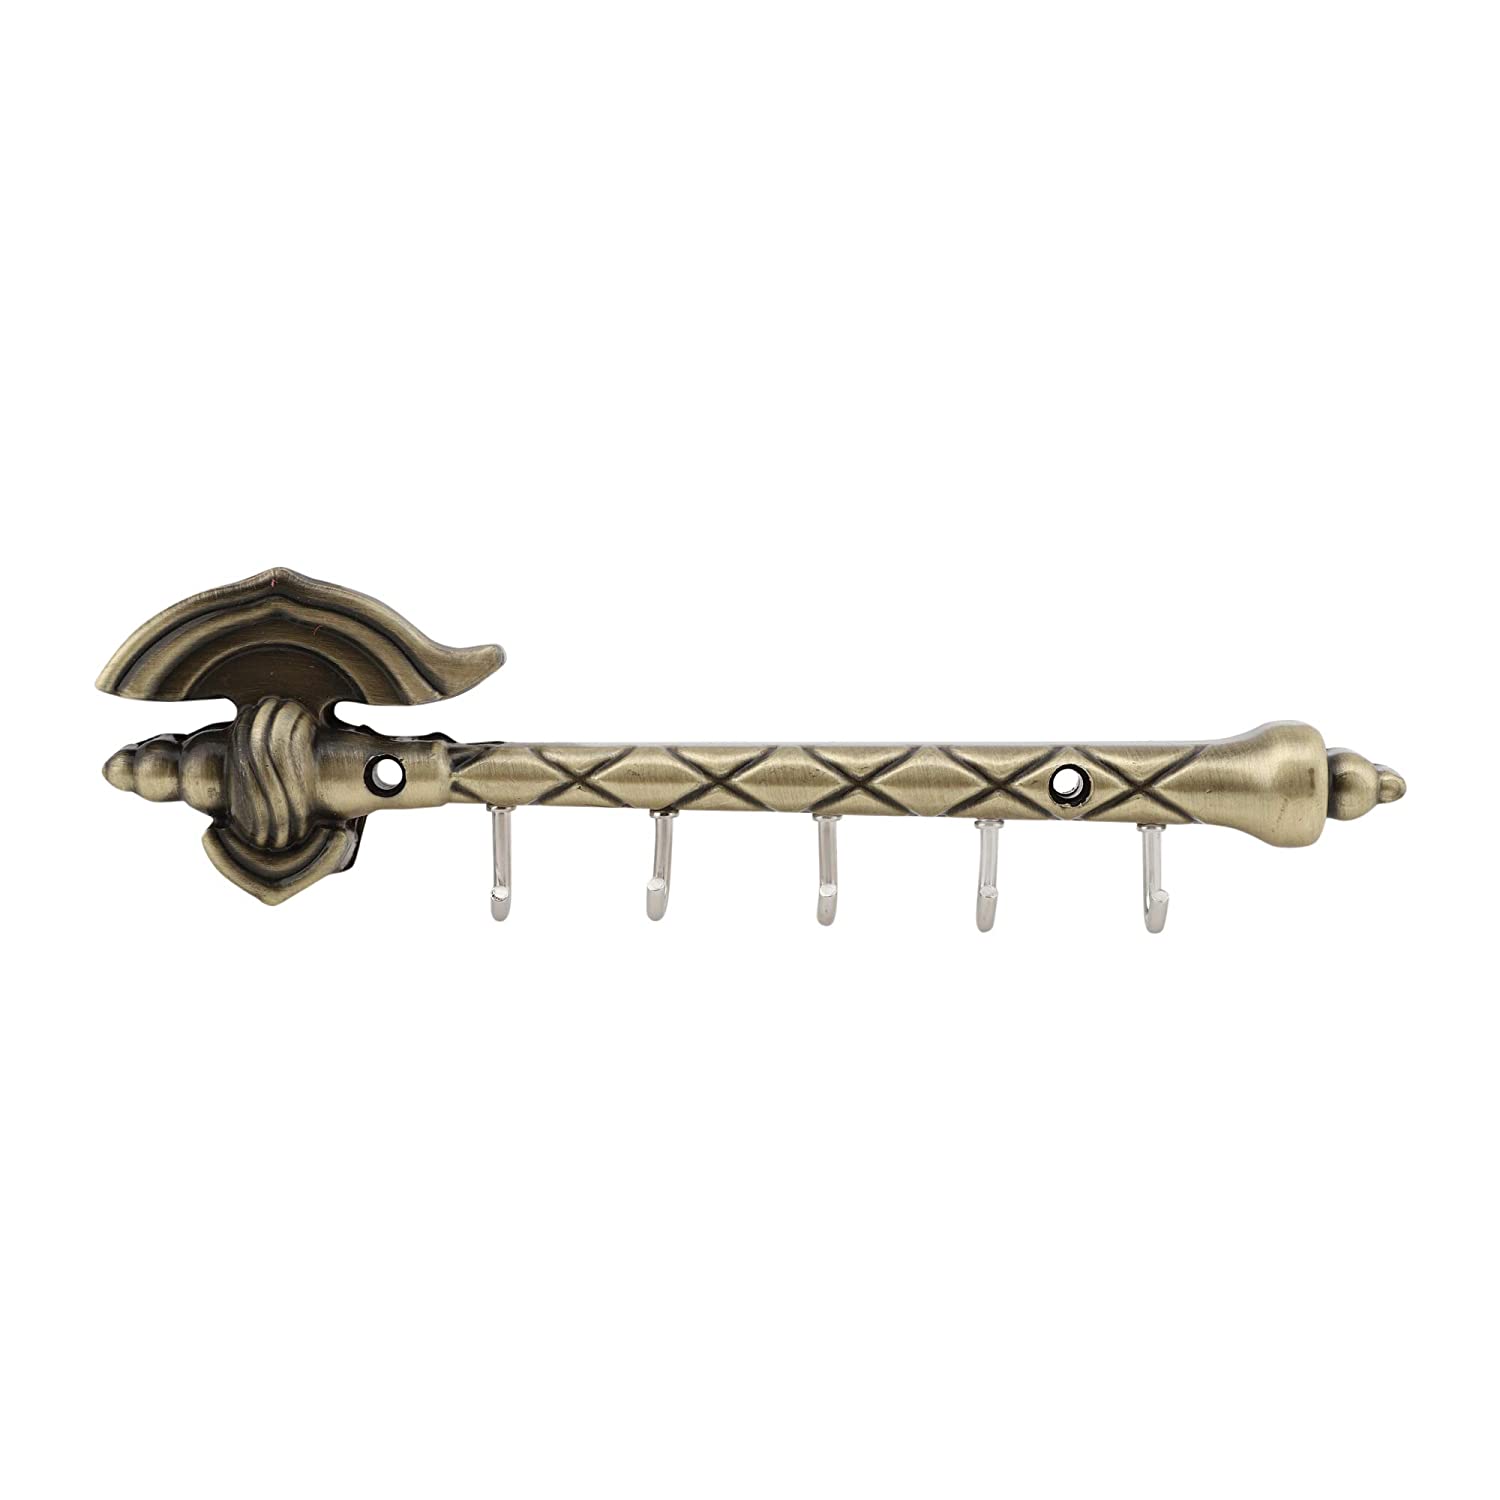 Bahubali Antique Key Holder for Wall - 6 Pin Key Hanging Hooks Rail Mangal Fashions | Indian Home Decor and Craft